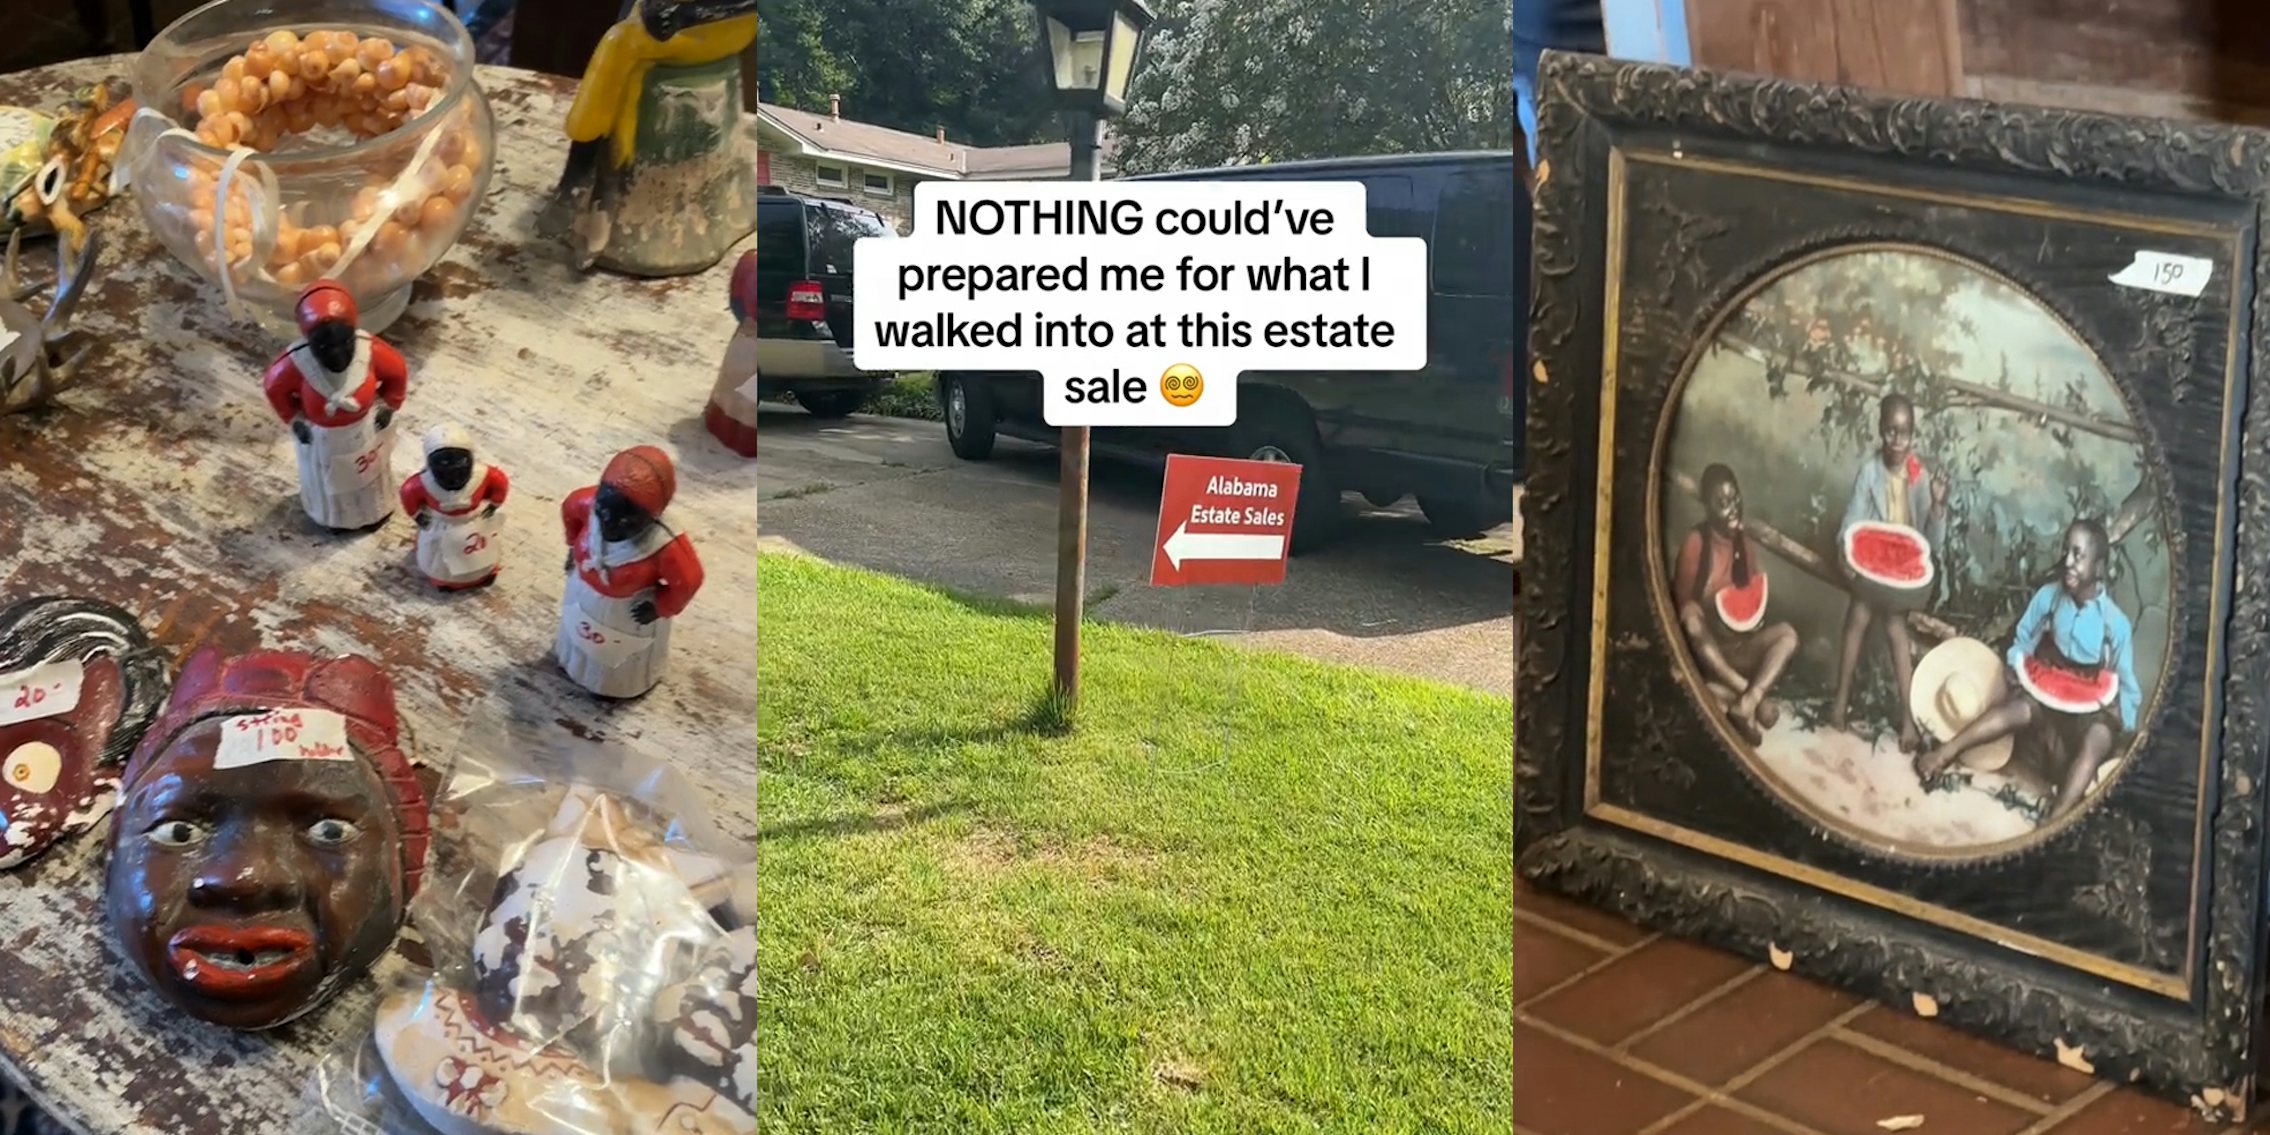 racist ceramic items on table at estate sale (l) Alabama Estate Sales sign outside on yard with caption 'NOTHING could've prepared me for what I walked into at this estate sale' (c) racist painting with price tag at estate sale' (r)